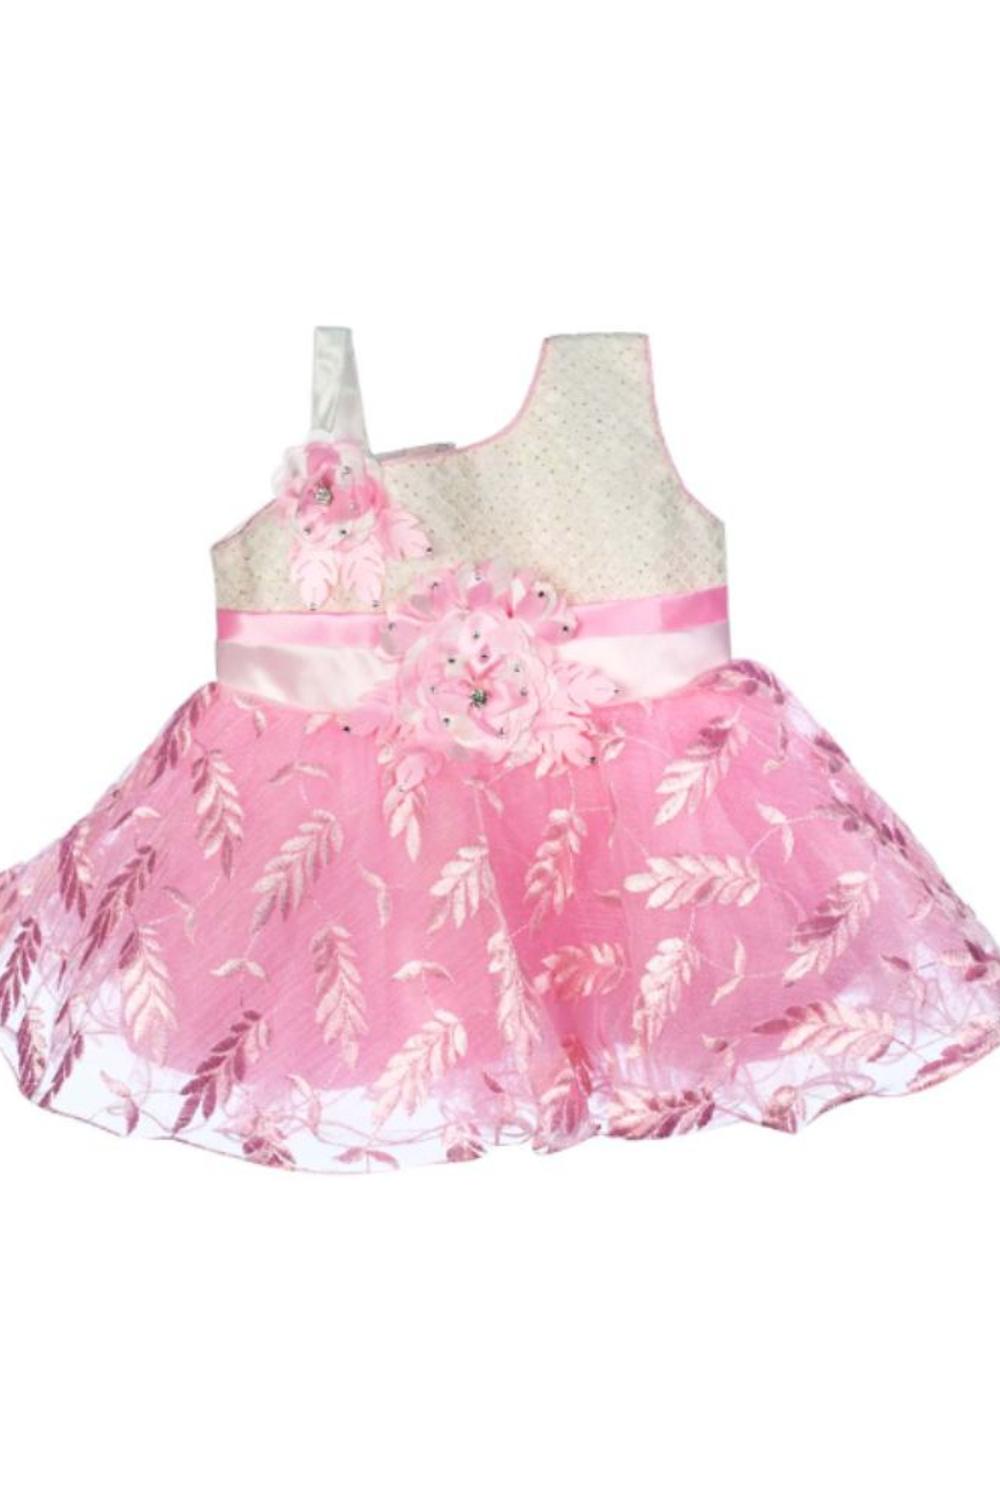 Mee Mee Baby Frilly Party Frock Pink White